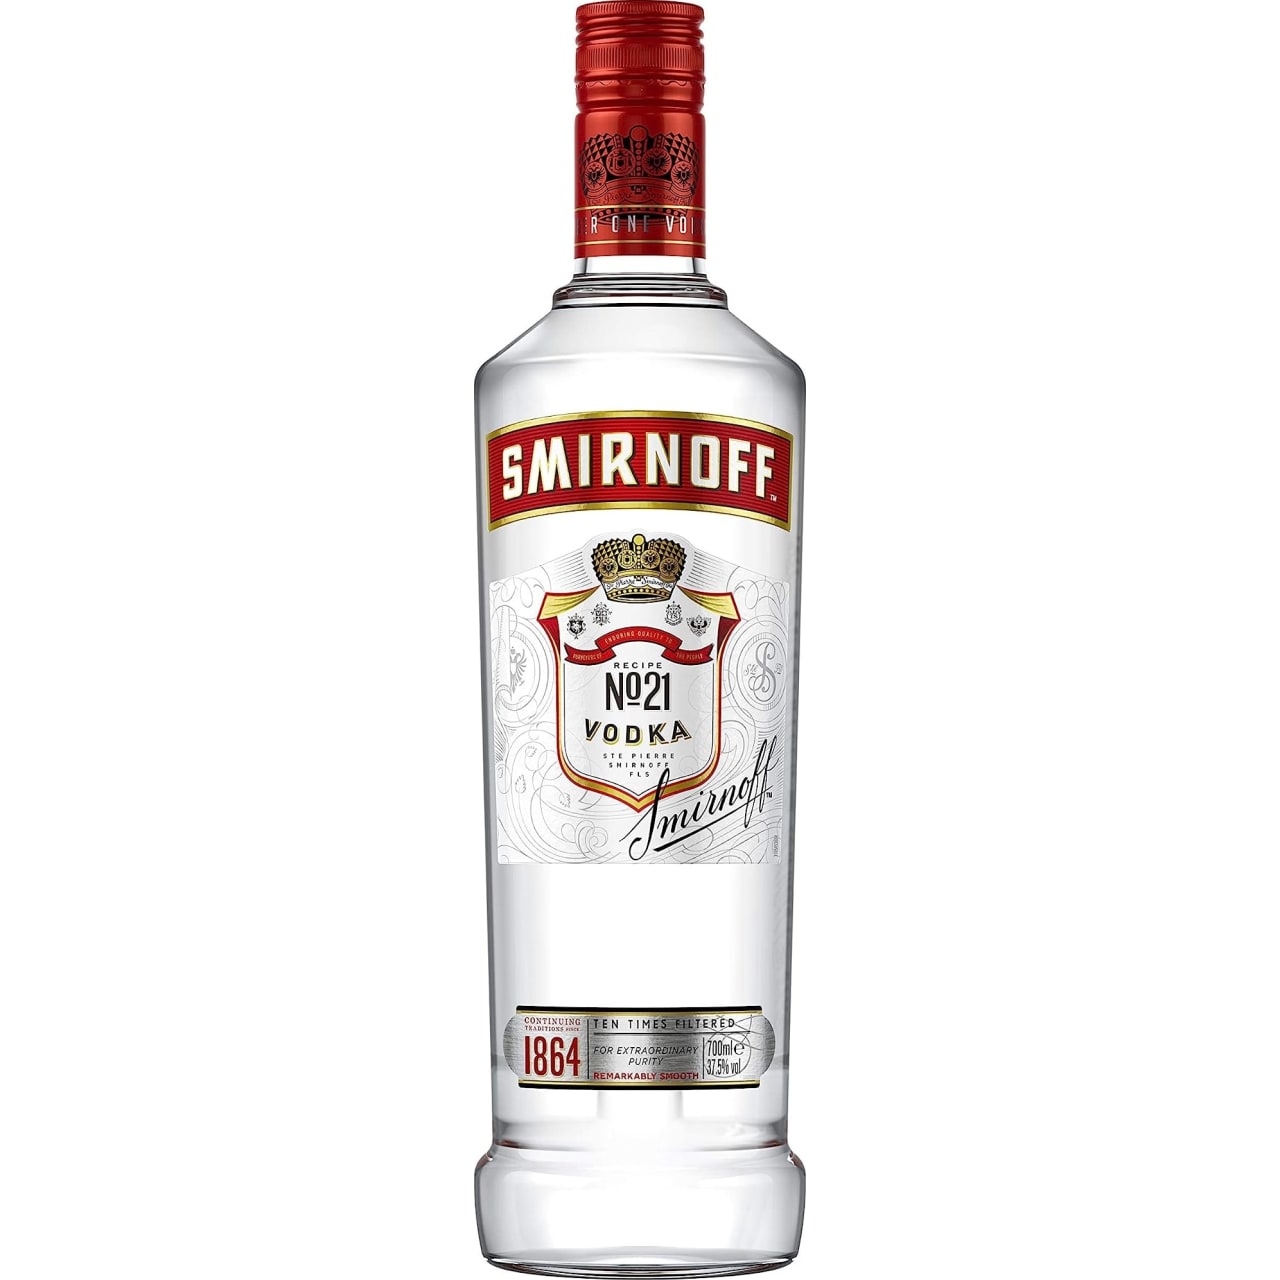 Since 1864 Smirnoff has used their multiple column filtration method to make award-winning, smooth-tasting vodka for everyone.